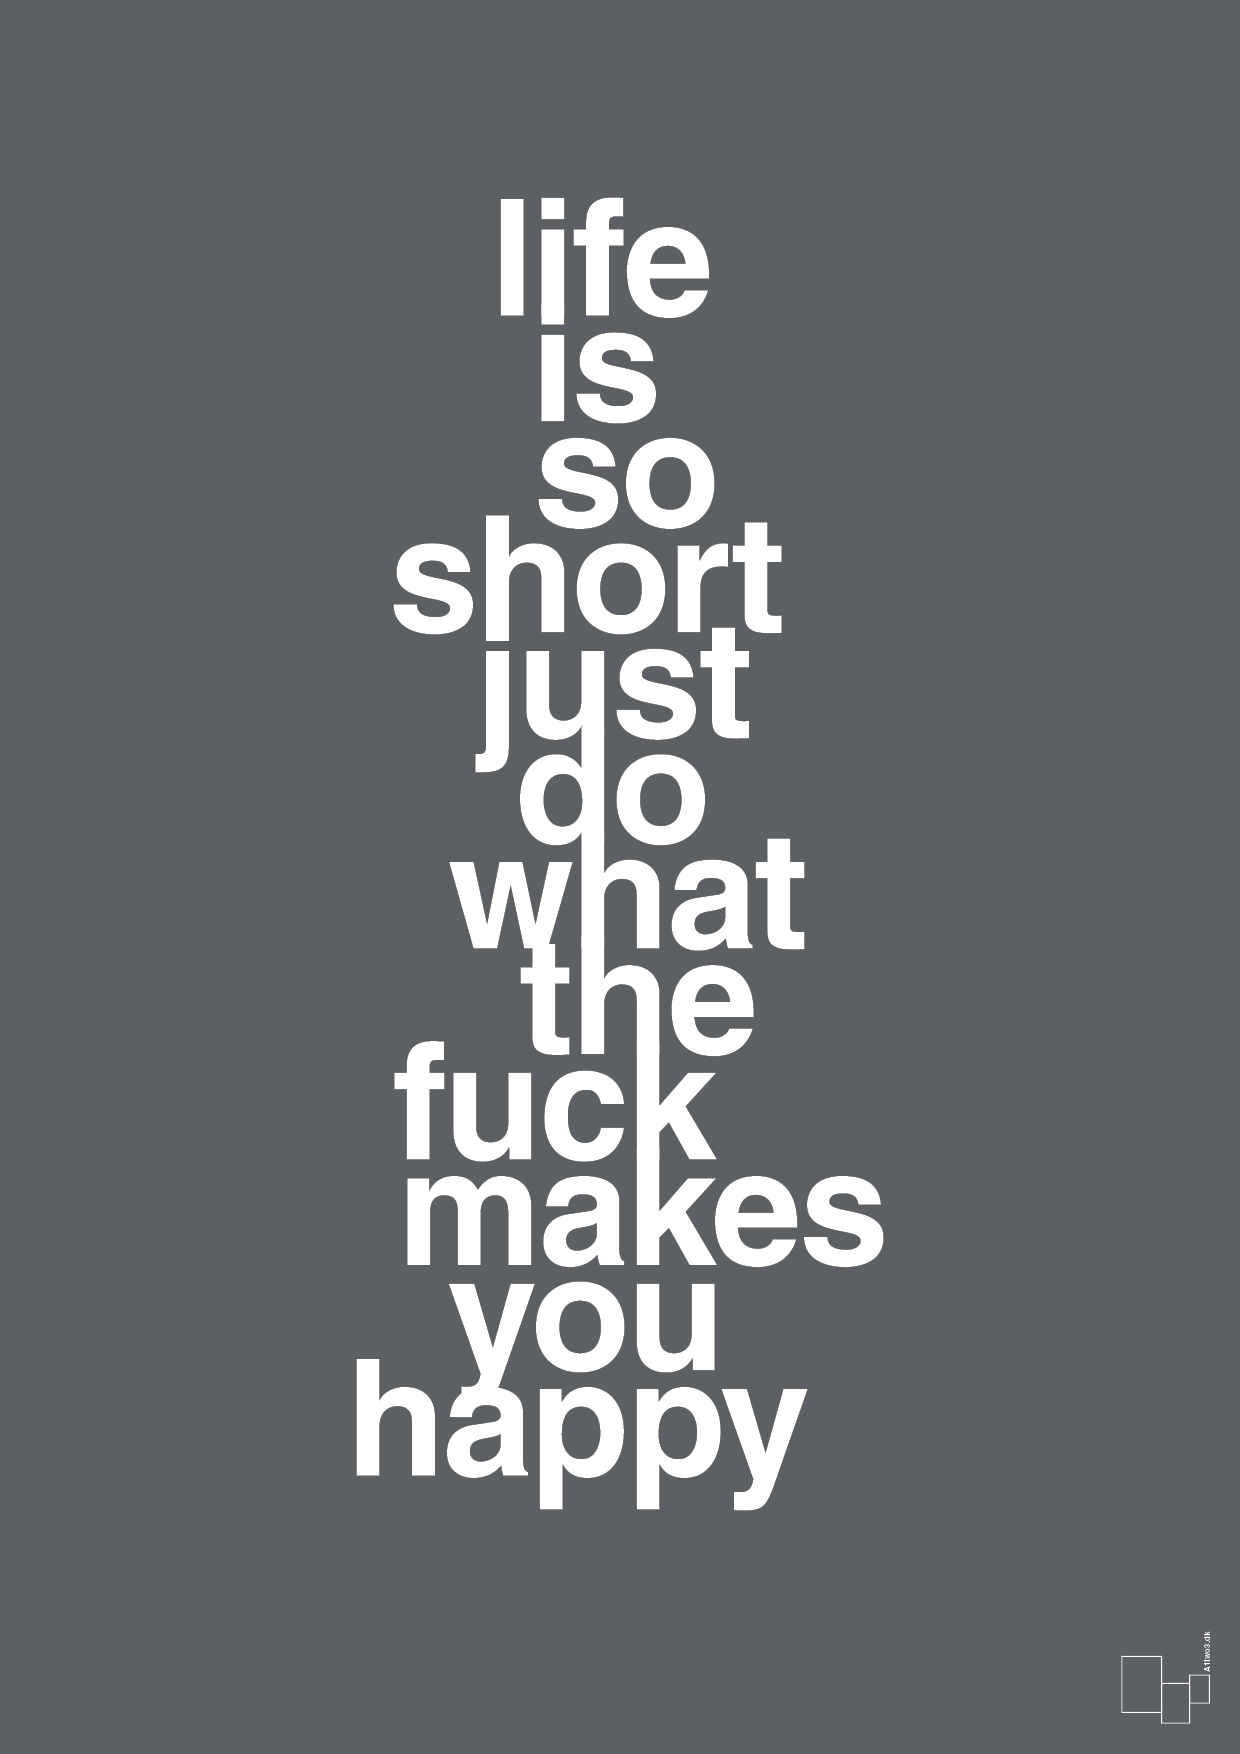 life is so short just do what the fuck makes you happy - Plakat med Ordsprog i Graphic Charcoal